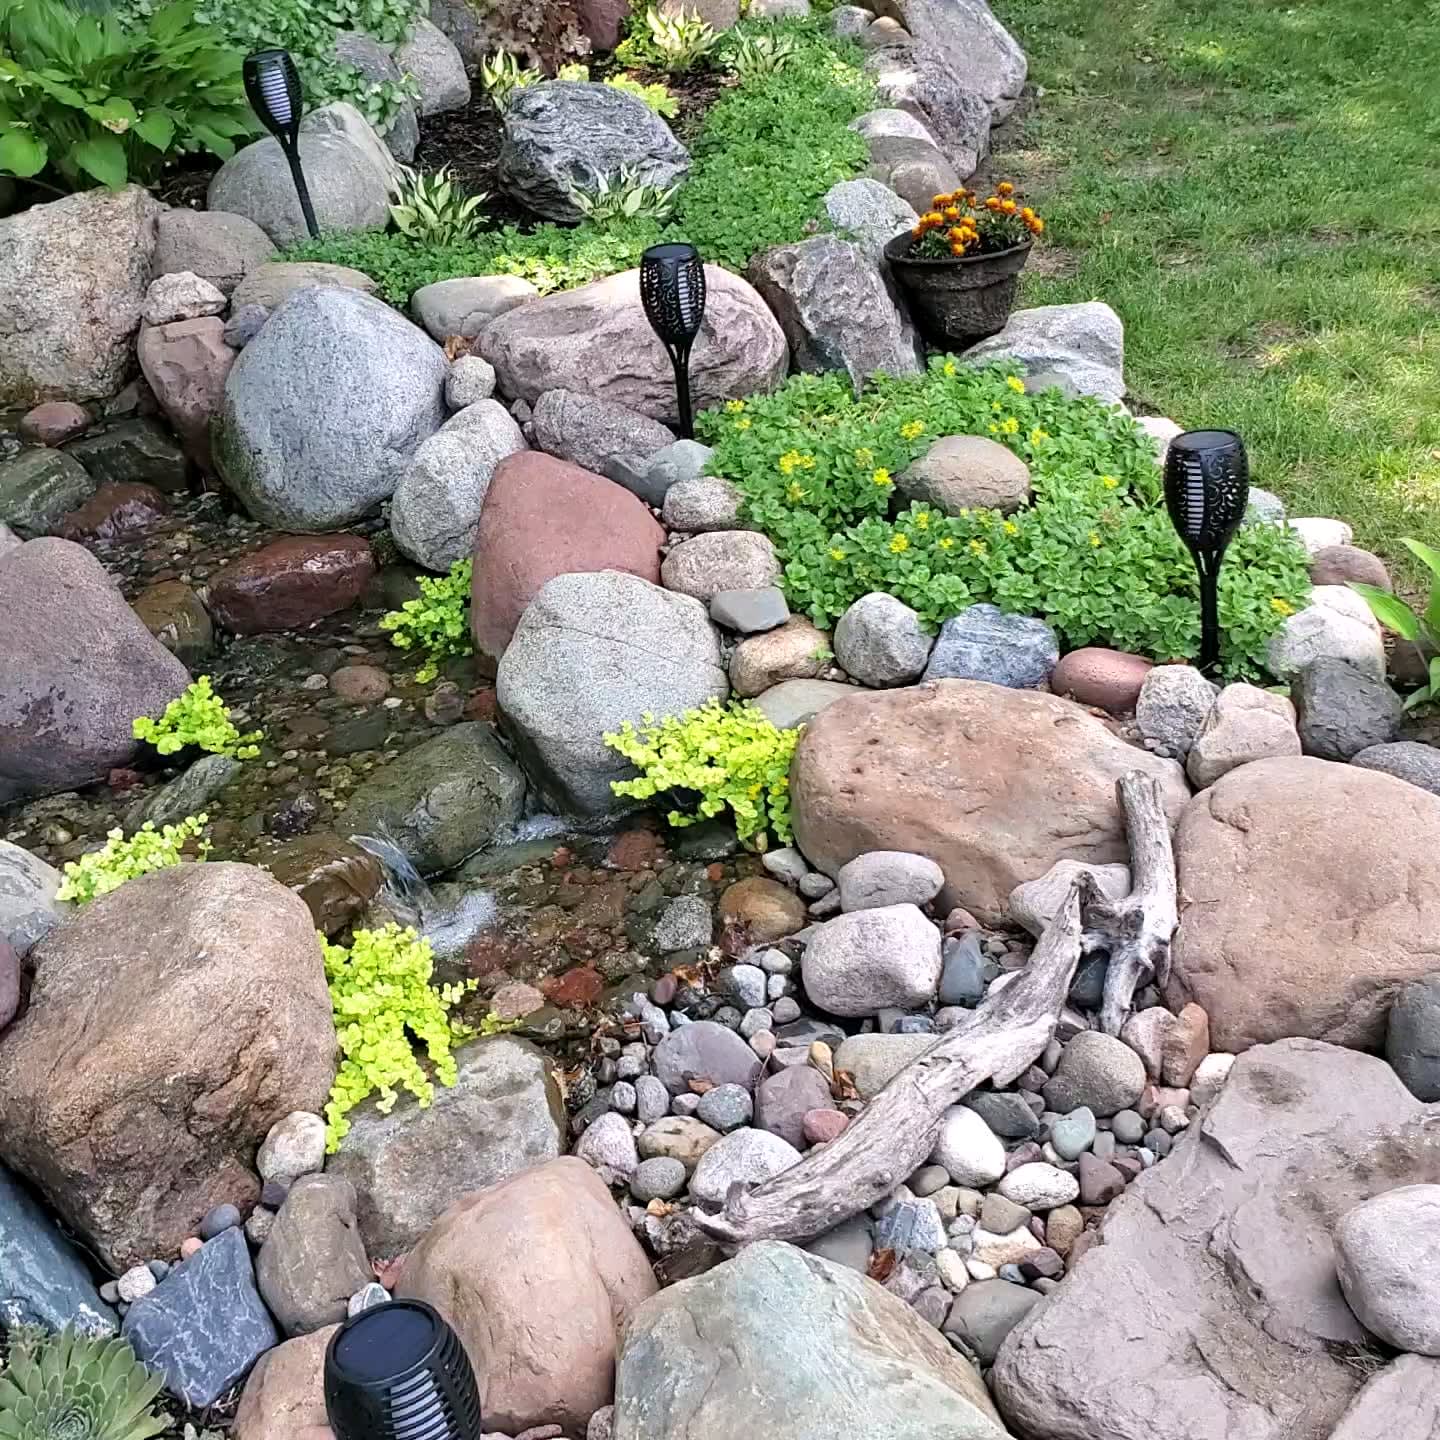 Our diy water feature/pondless waterfall garden is coming along nicely!